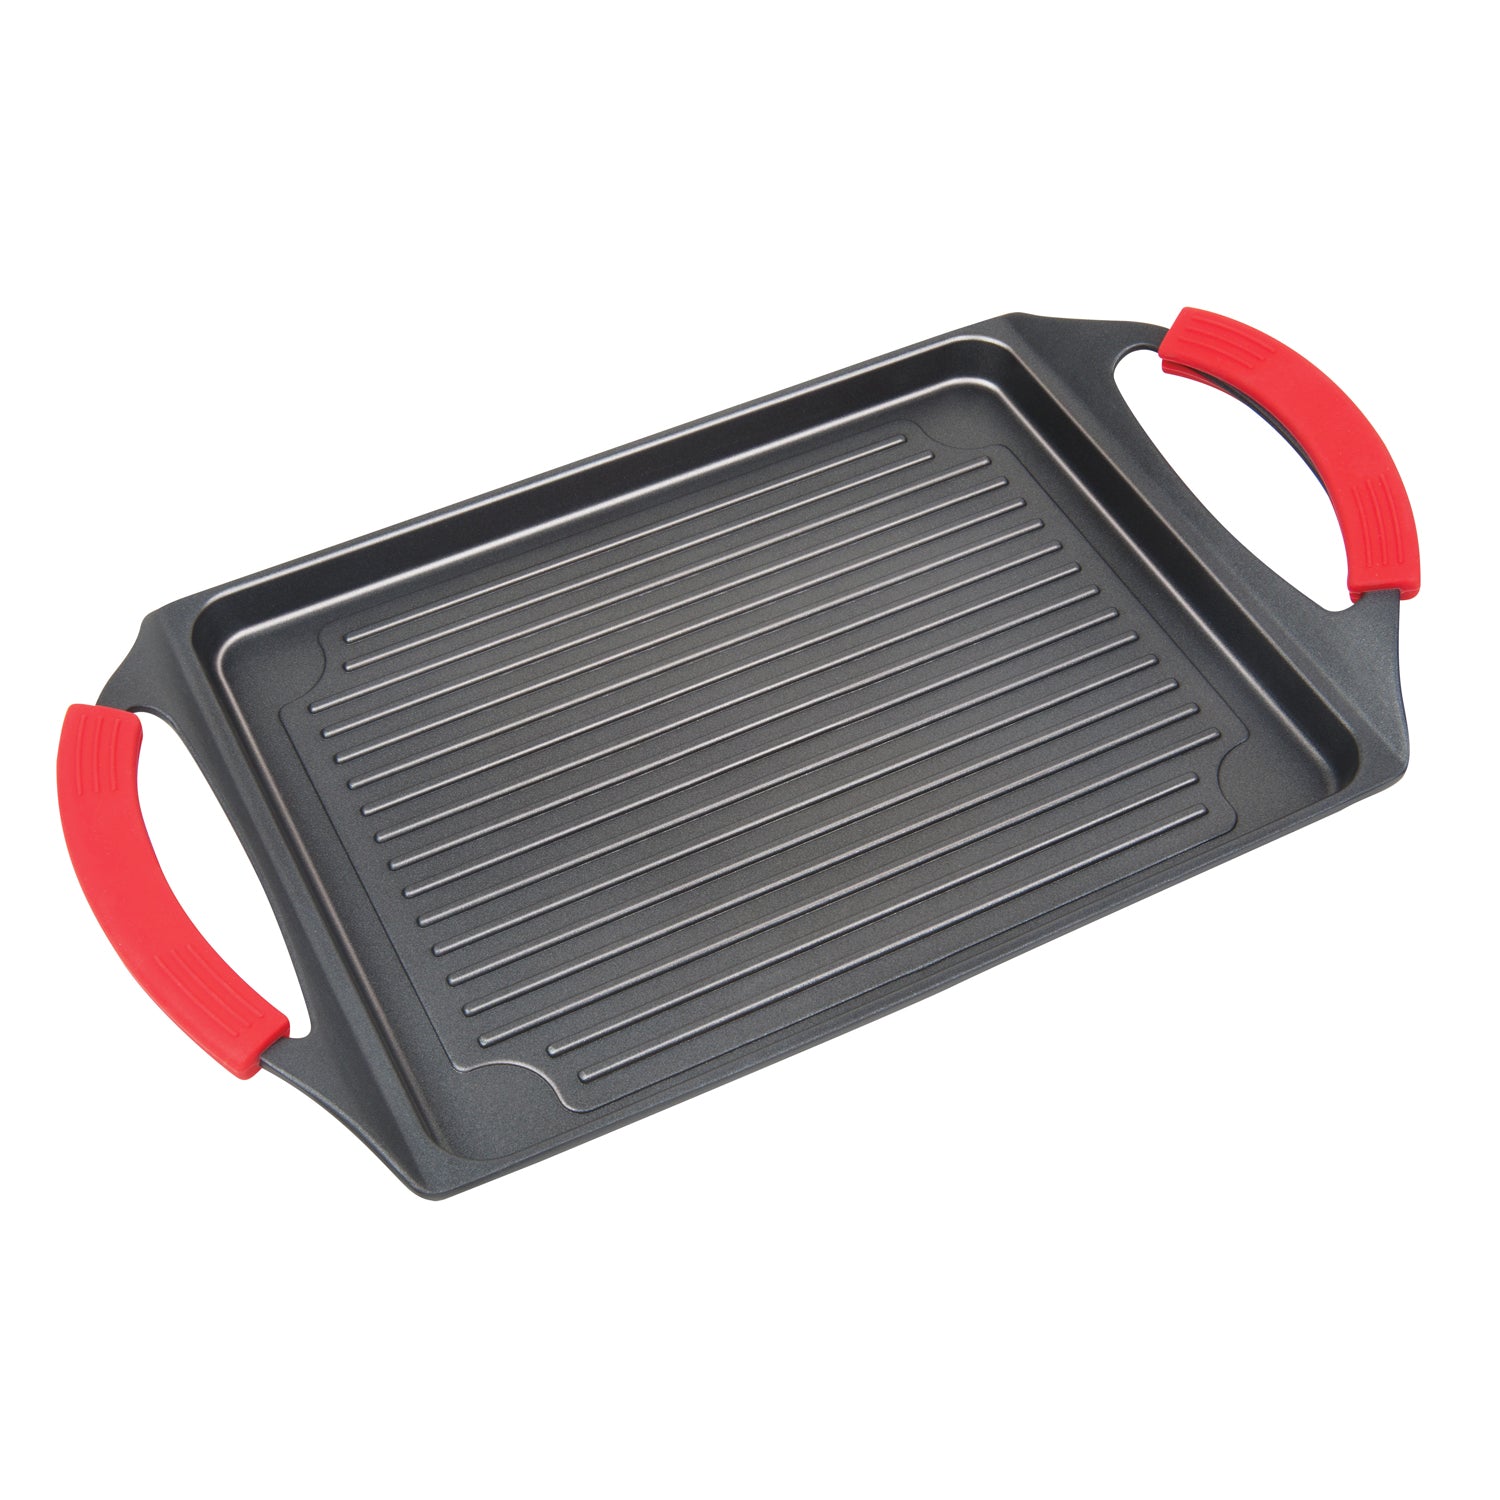 MASTERPAN Nonstick Grill Plate with Silicone Handles, 10